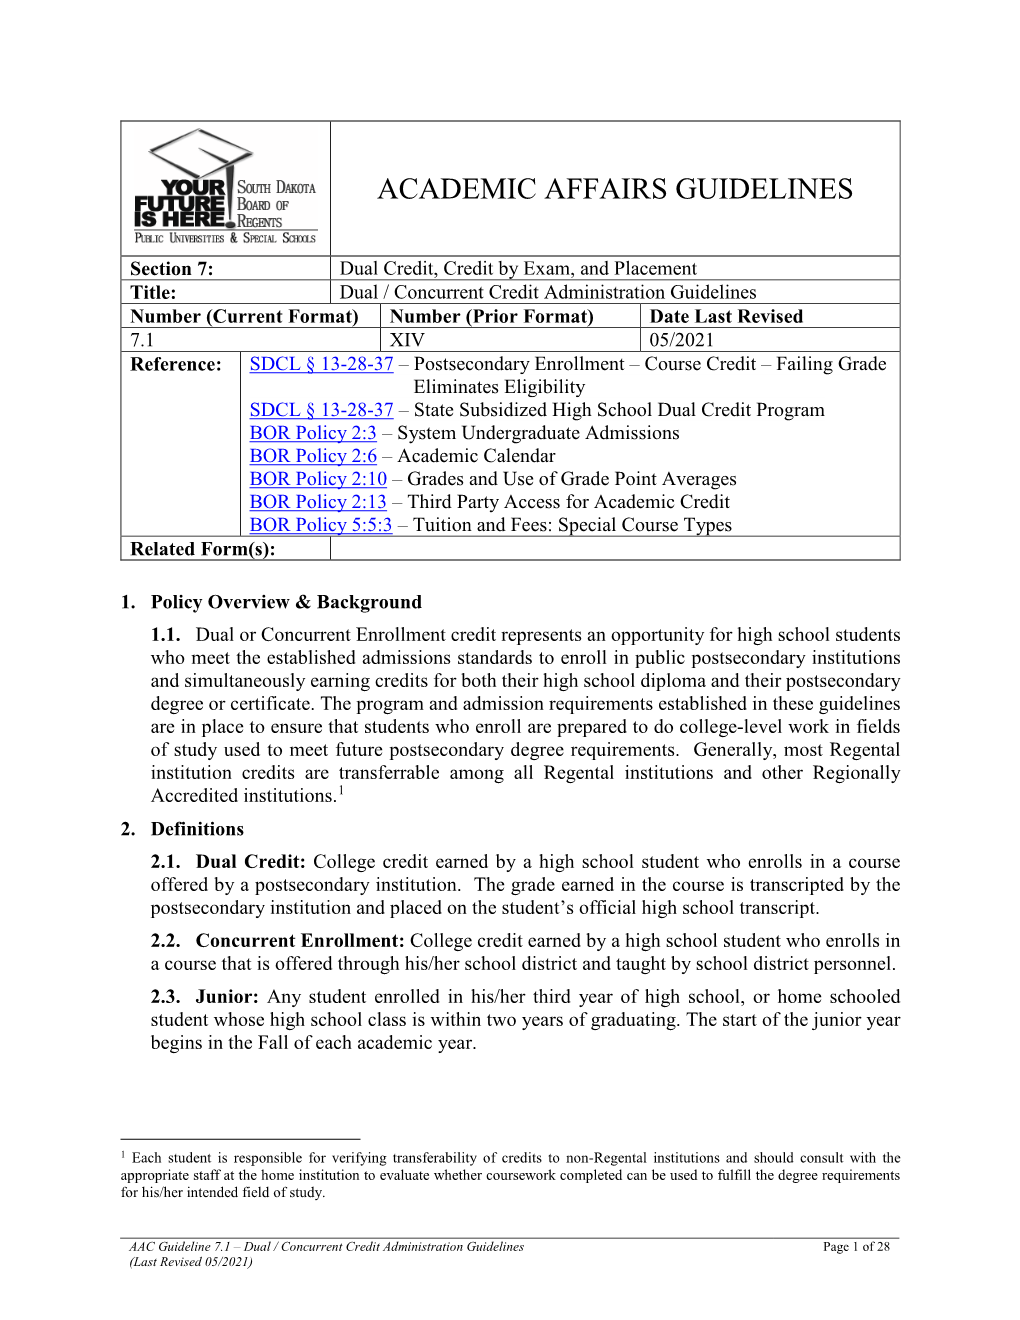 Academic Affairs Guideline 7.1 – Dual and Concurrent Credit